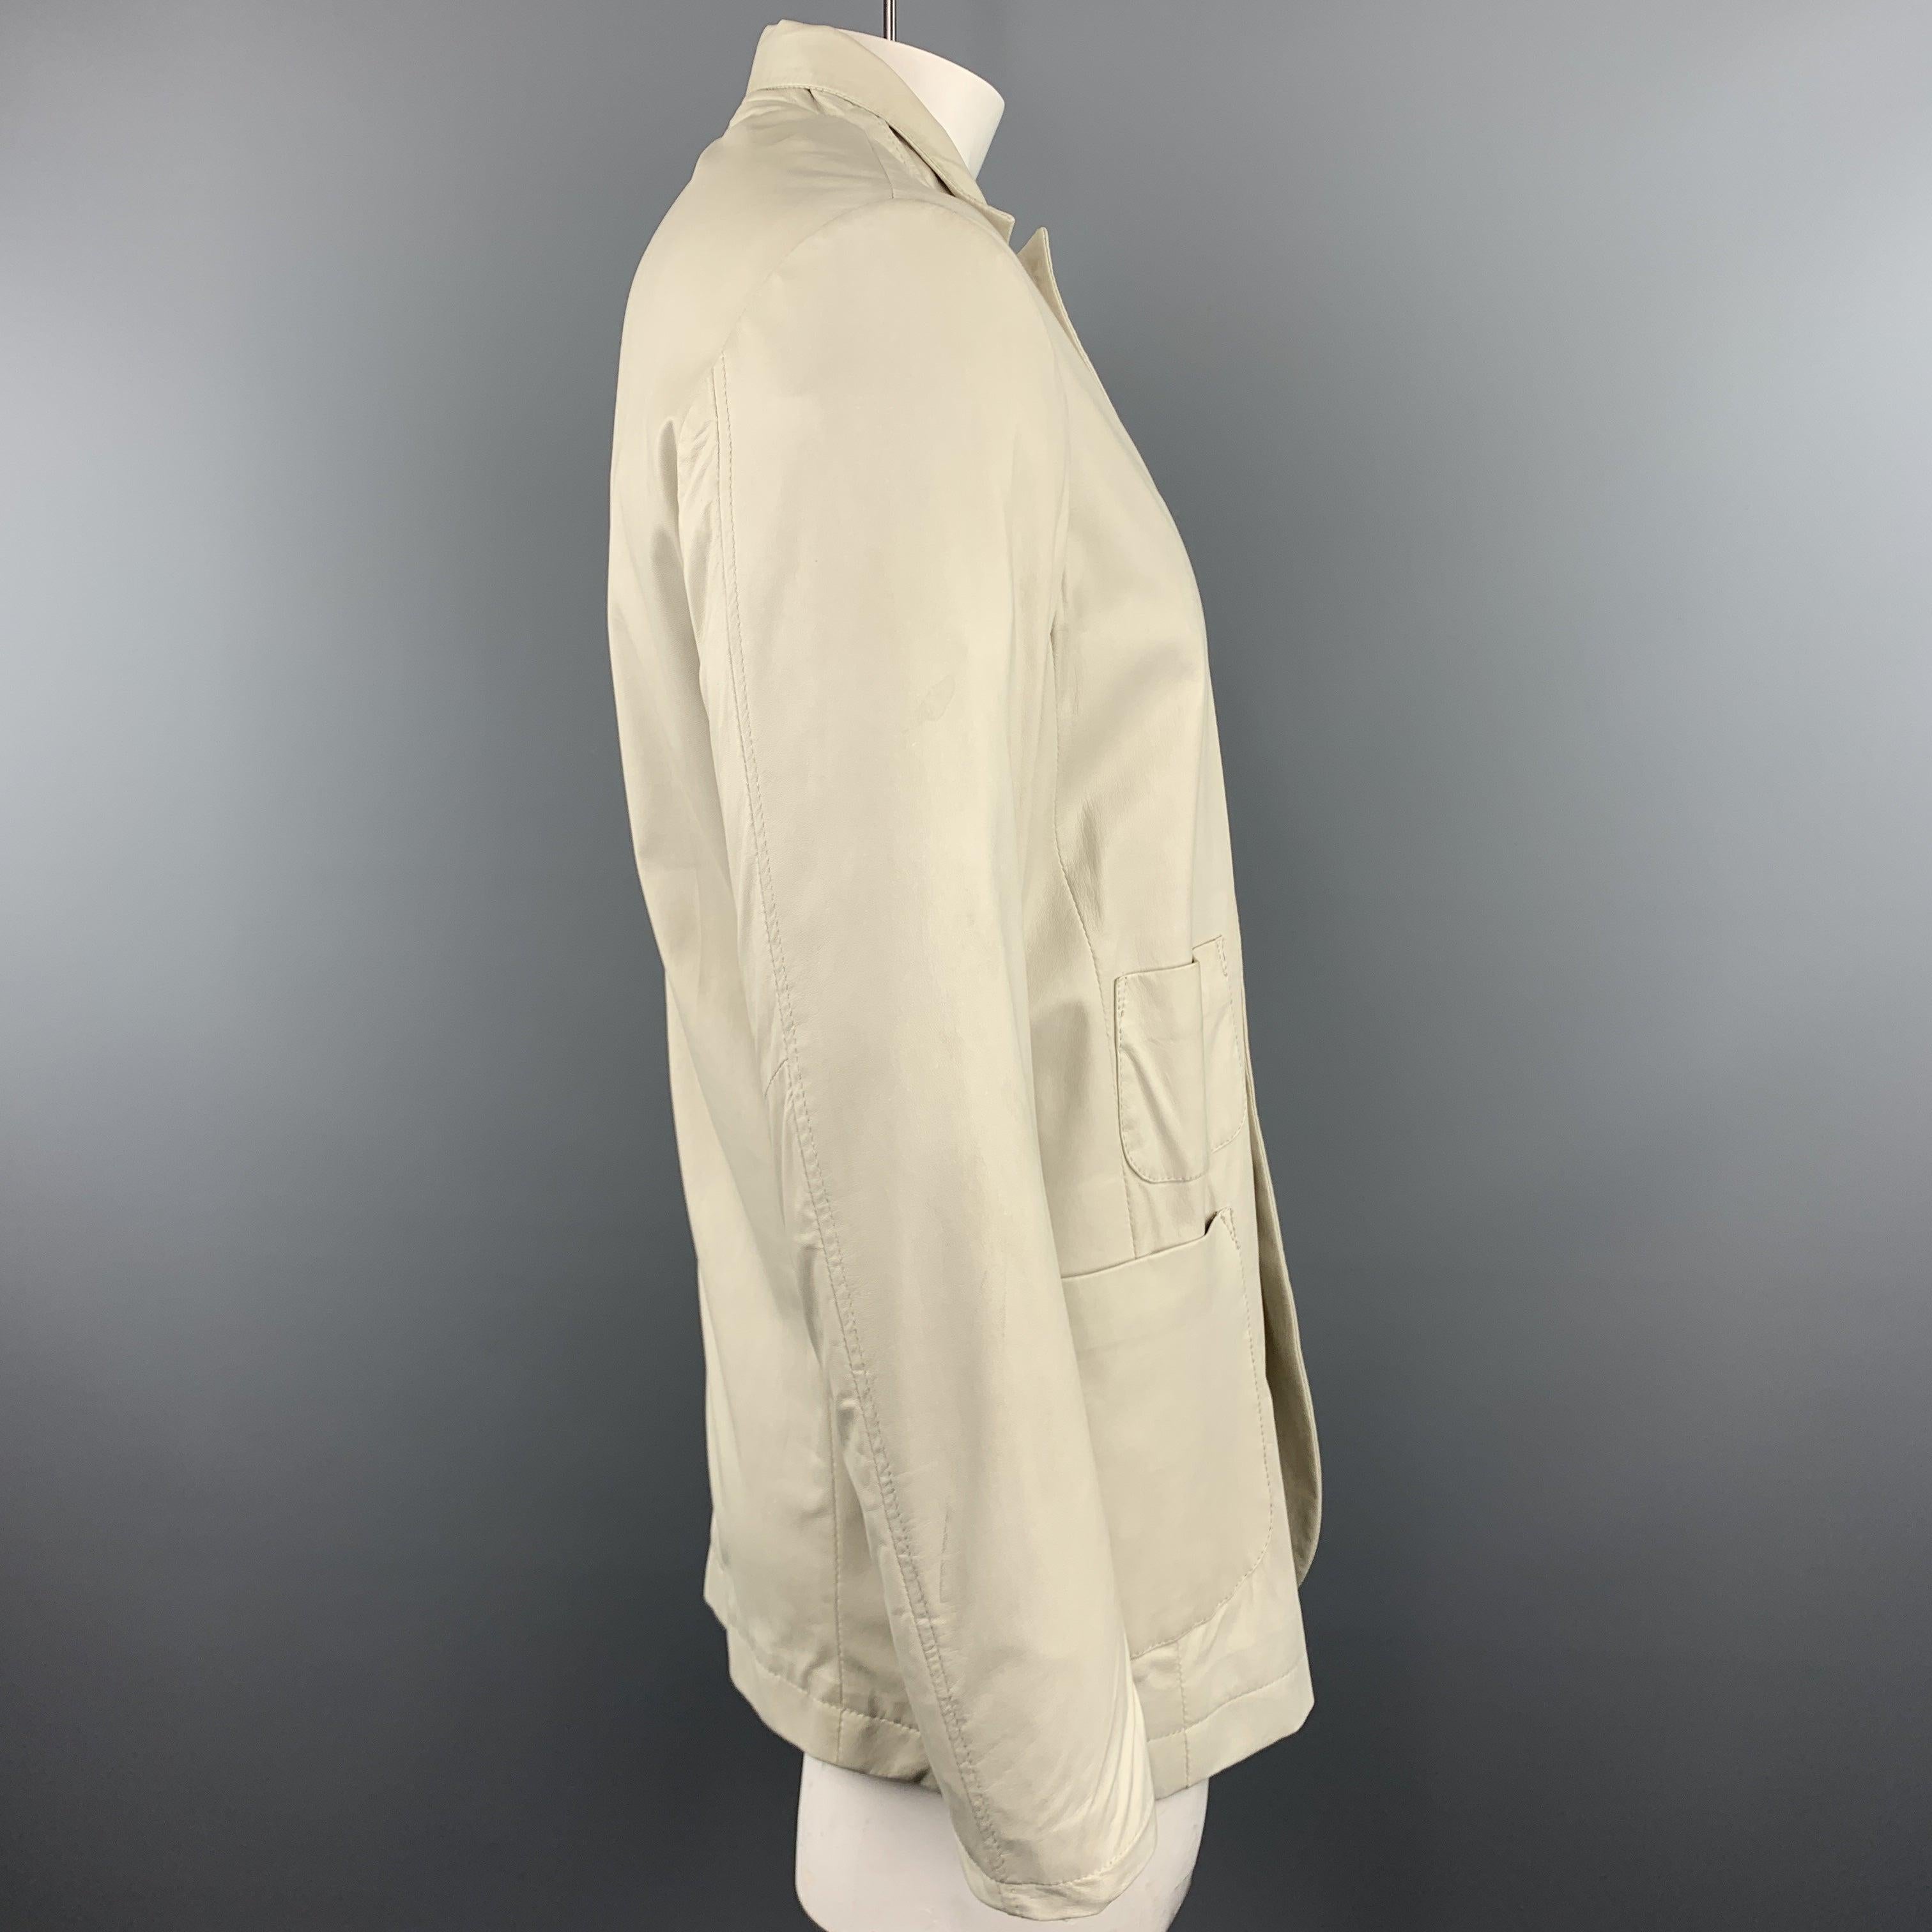 GIORGIO BRATO 42 Ivory Soft Leather Patch Pocket Tab Collar Jacket For Sale 4